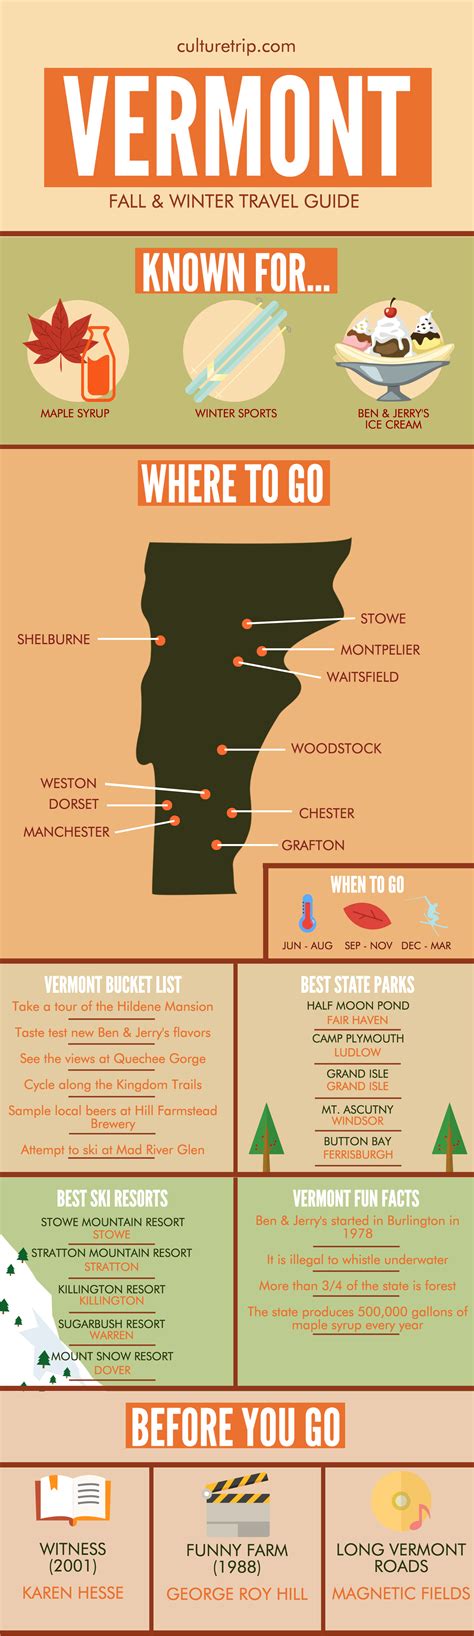 Vermonts Autumn And Winter Travel Guide Infographic